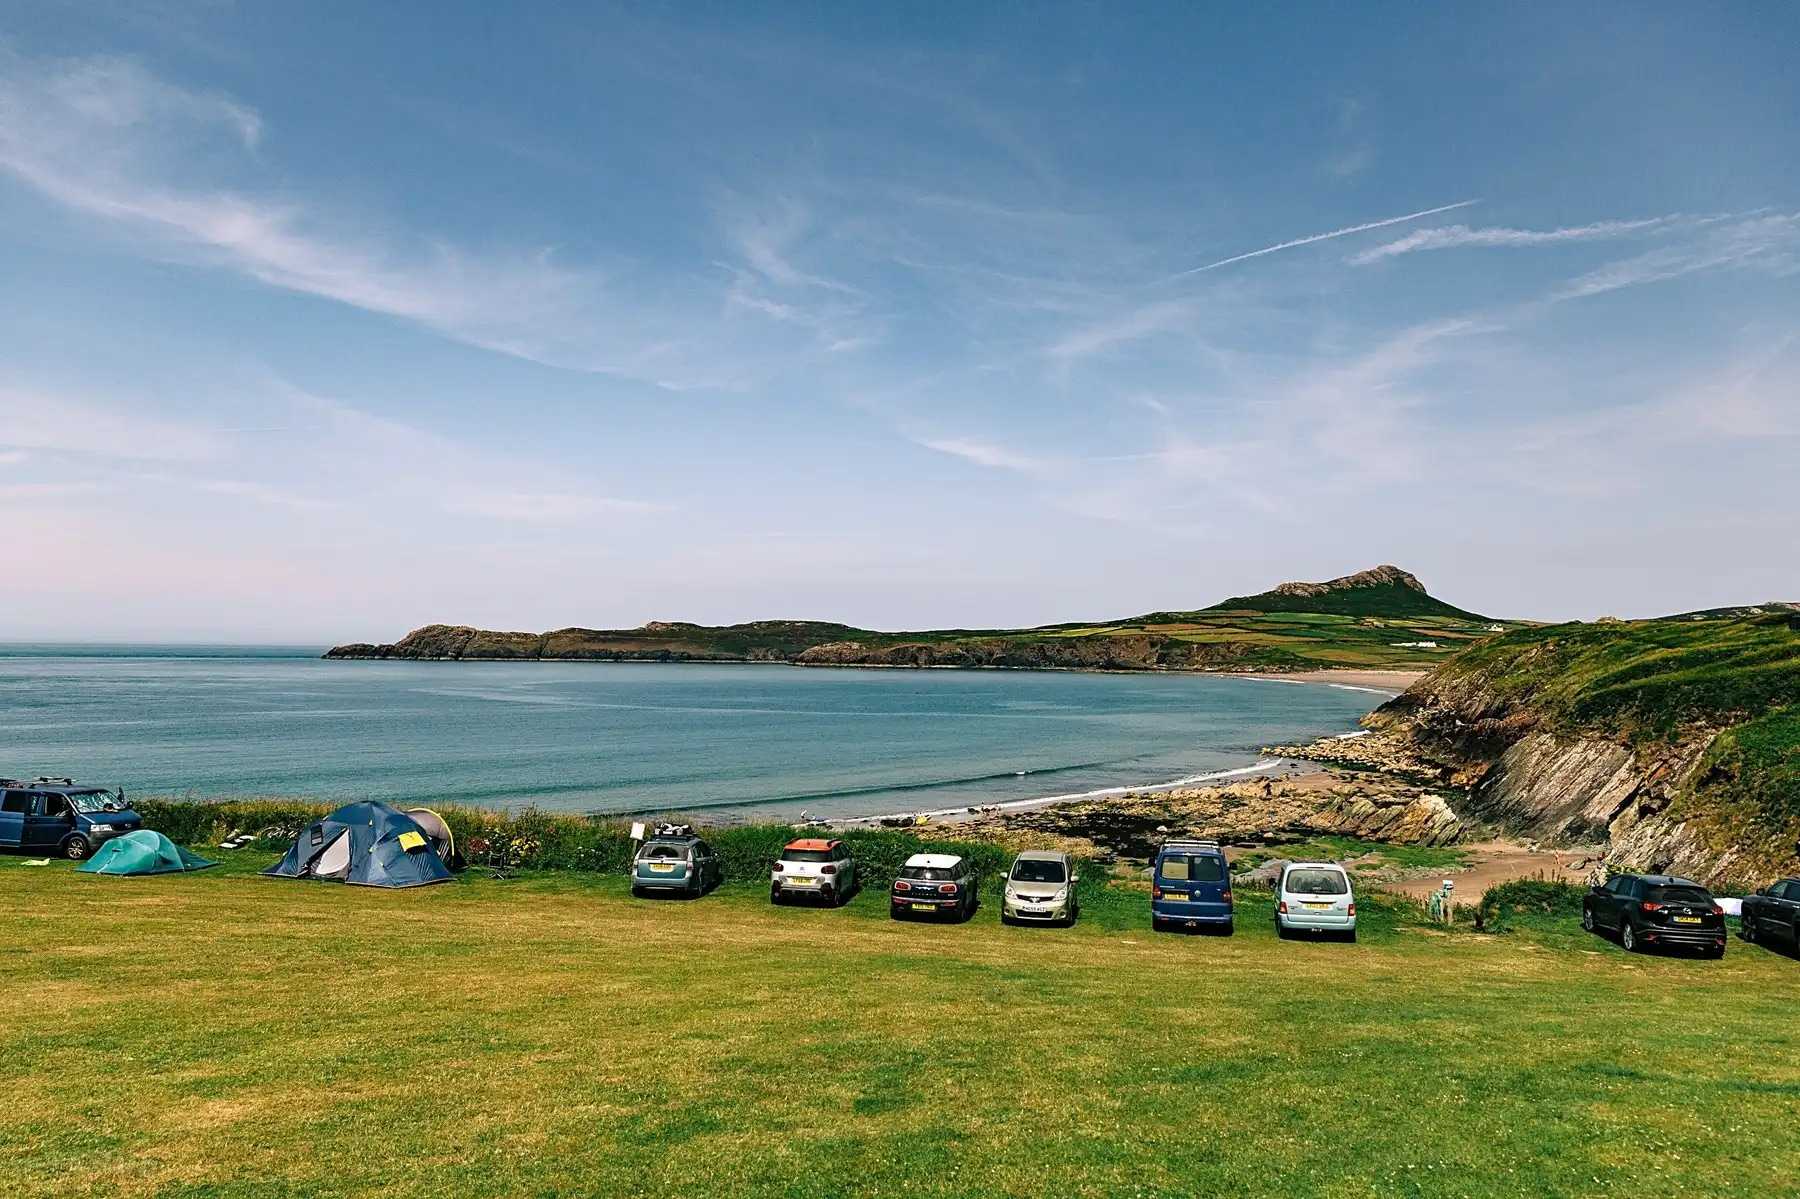 Sea views are high up on the wishlist for many campers